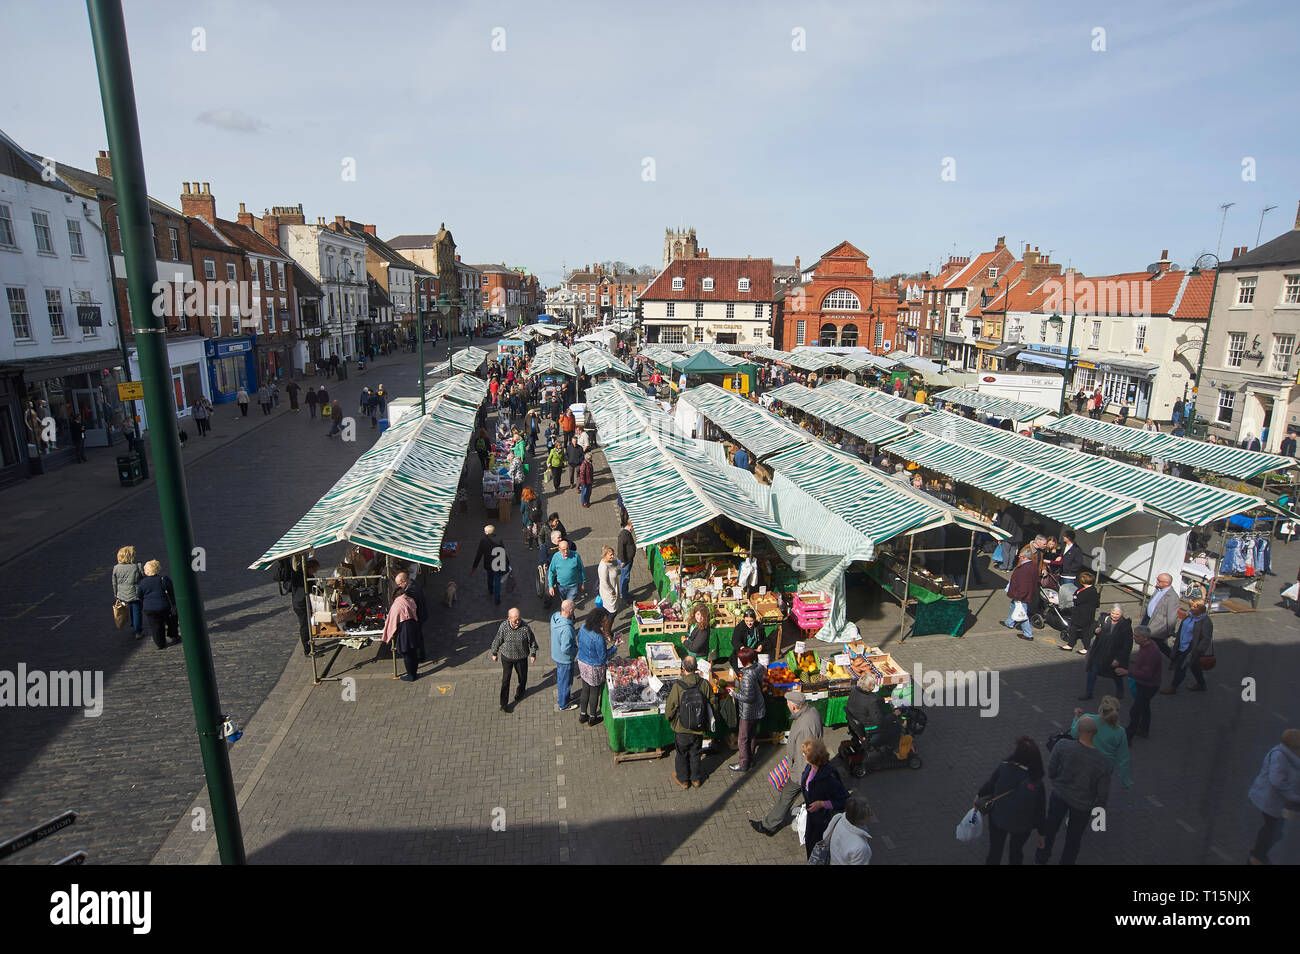 Over head view of Beverley Market, Saturday Market, East Yorkshire, March 23rd 2019, England, UK, GB. Credit: Alan Mather/Alamy Live News Stock Photo